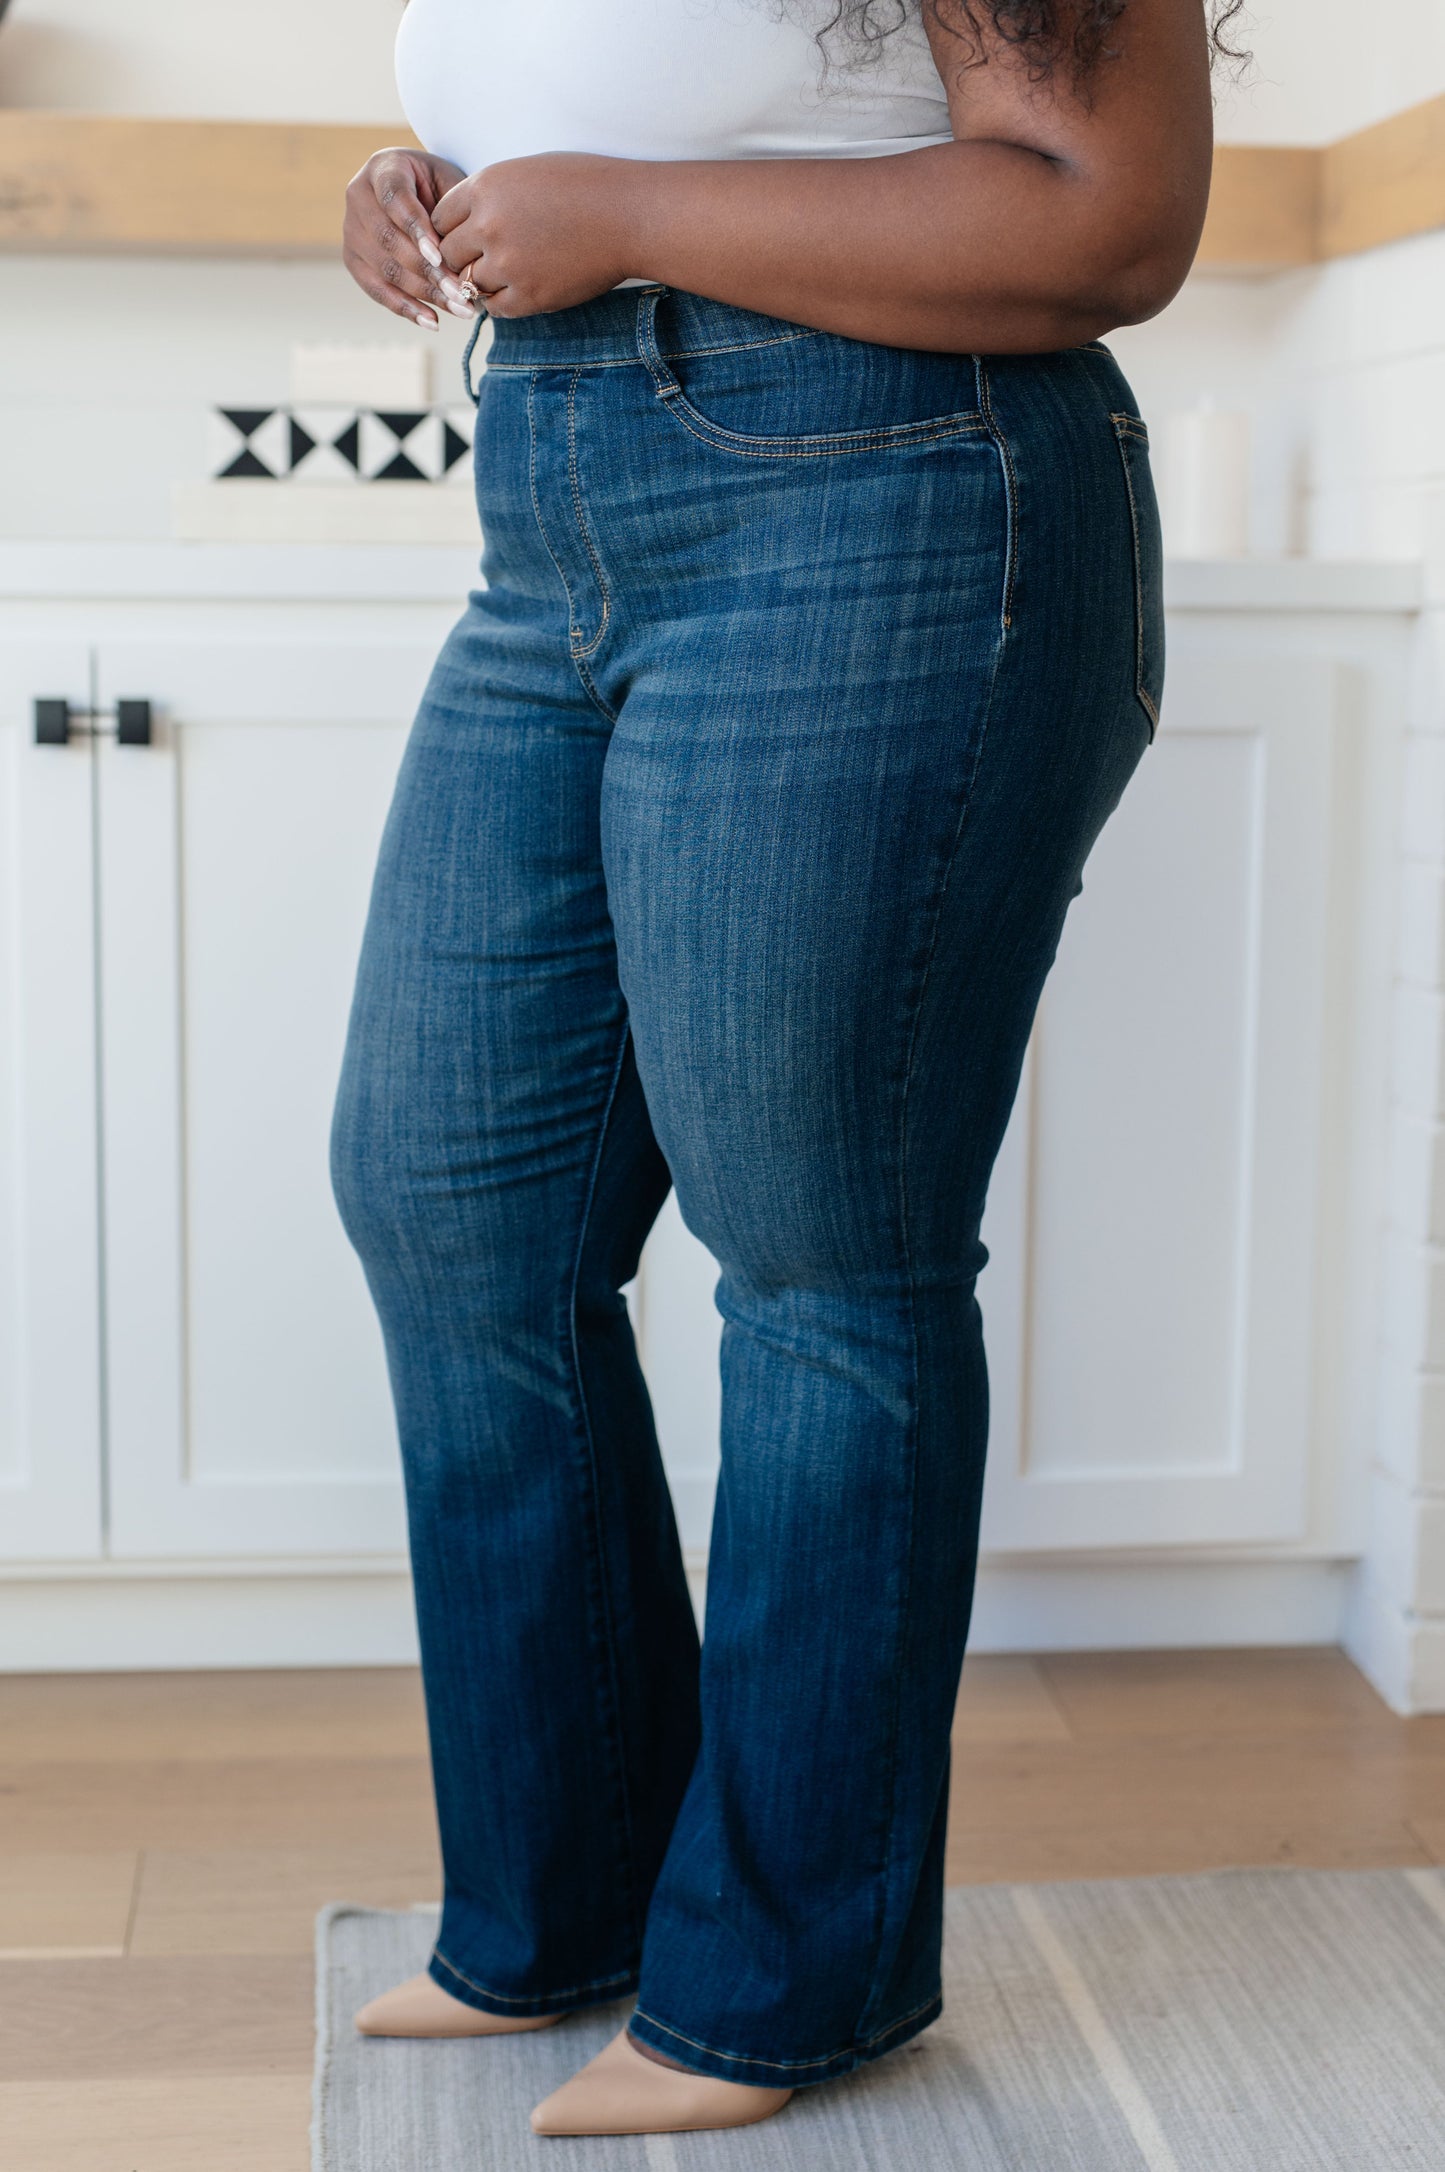 Judy Blue High Rise Pull On Slim Bootcut Jeans